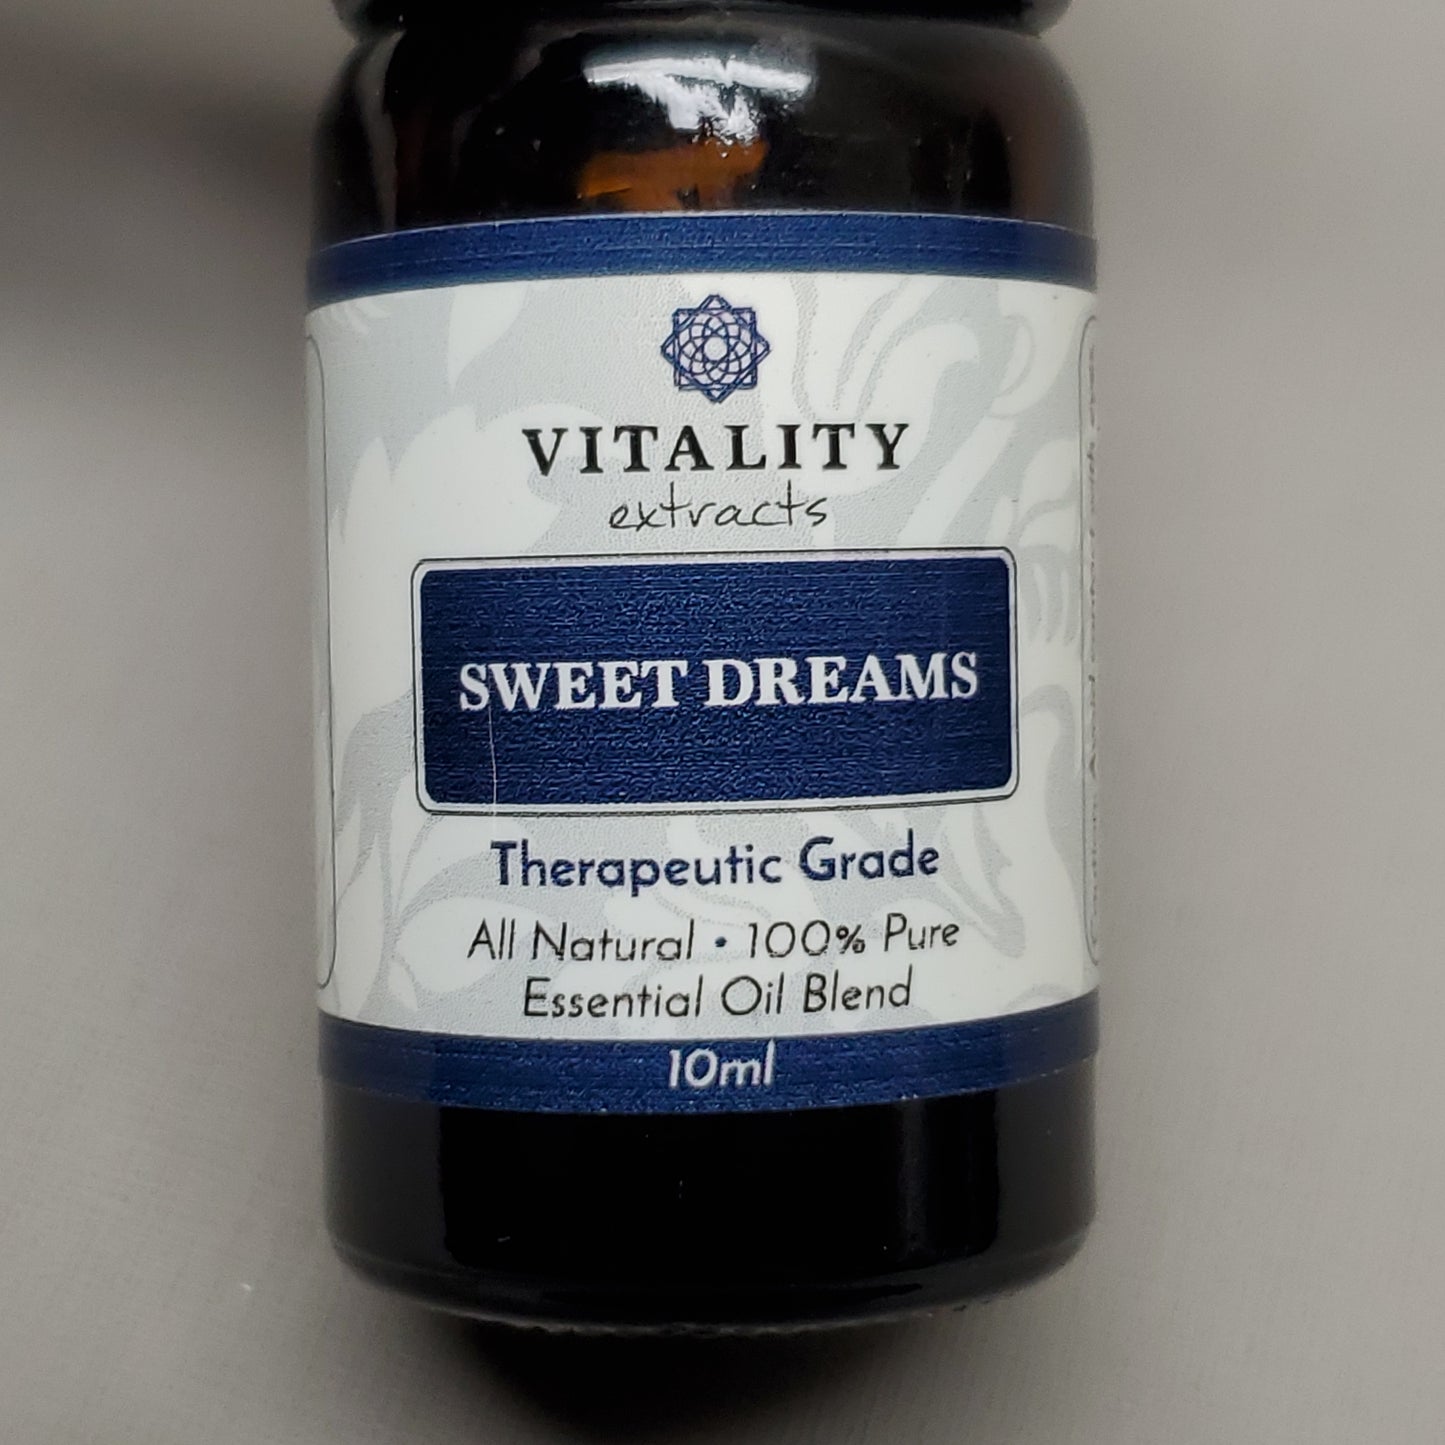 VITALITY EXTRACT Sweet Dreams All Natural Pure Essential Oil Blend 10ml (02/25)